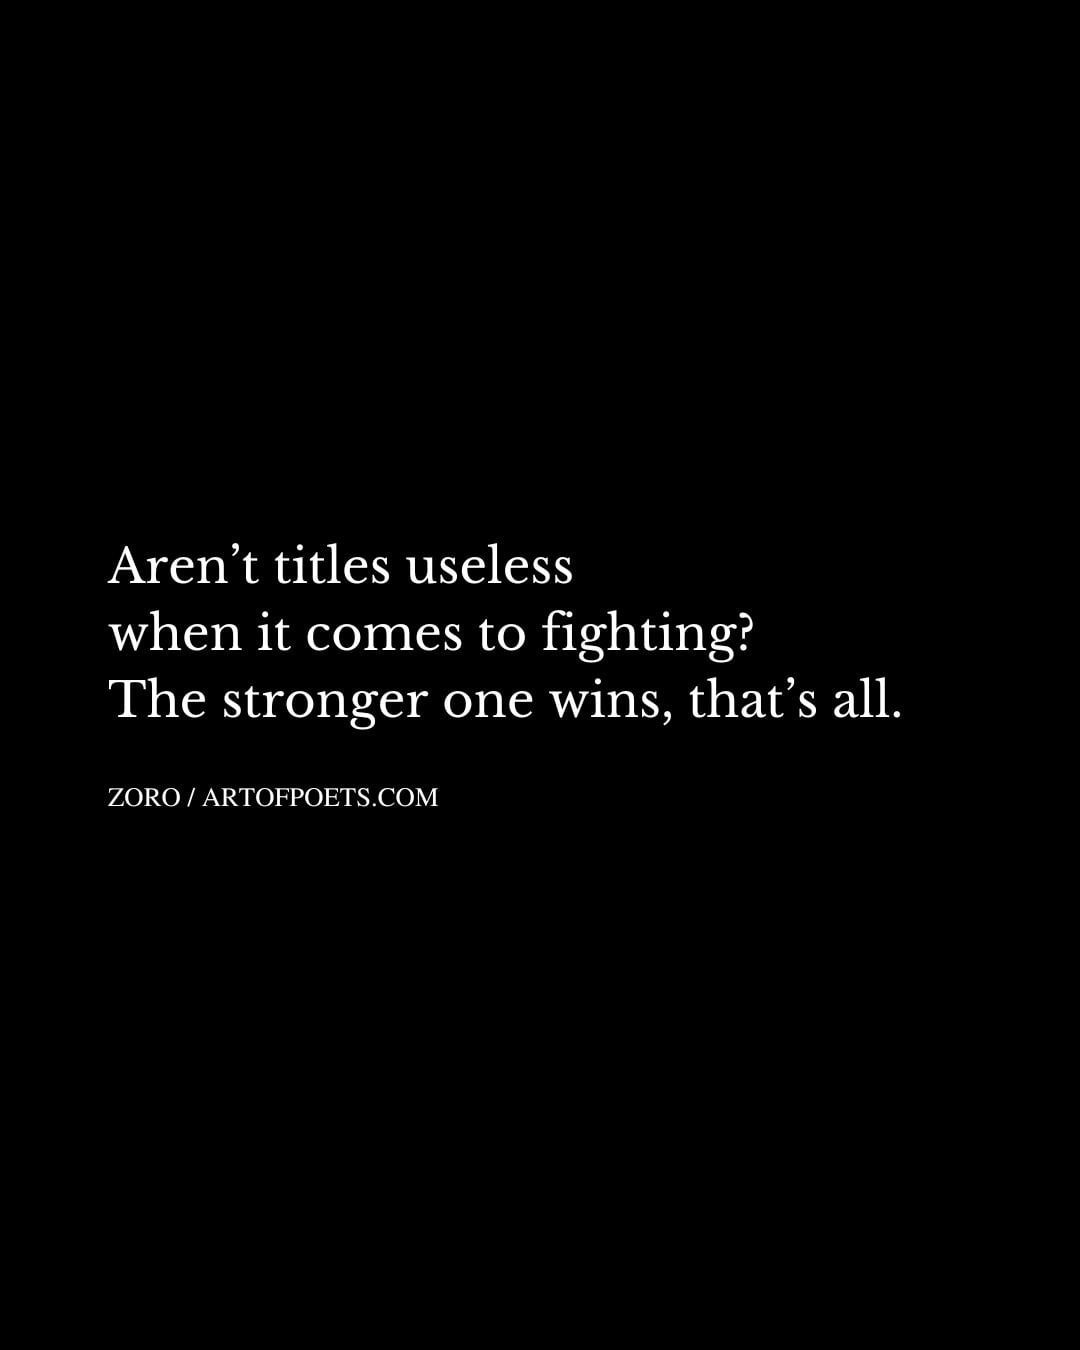 Arent titles useless when it comes to fighting The stronger one wins thats all